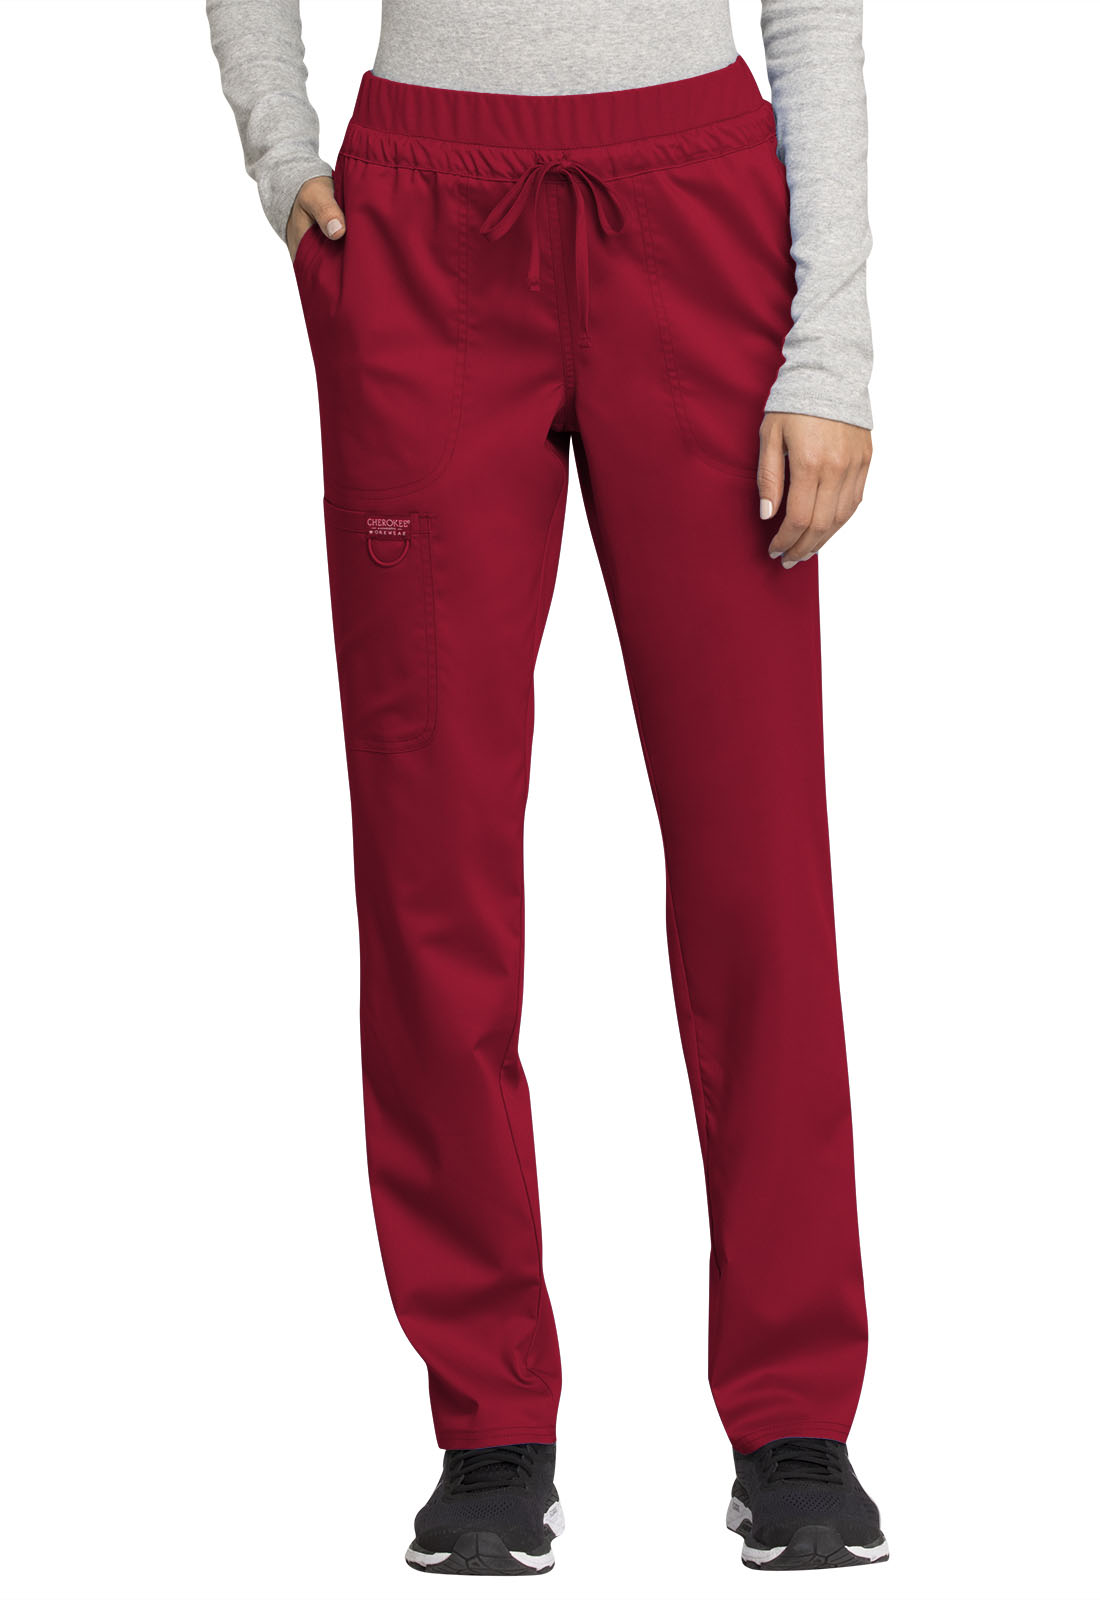 Women's Hathaway tapered leg pant – Essential Threads